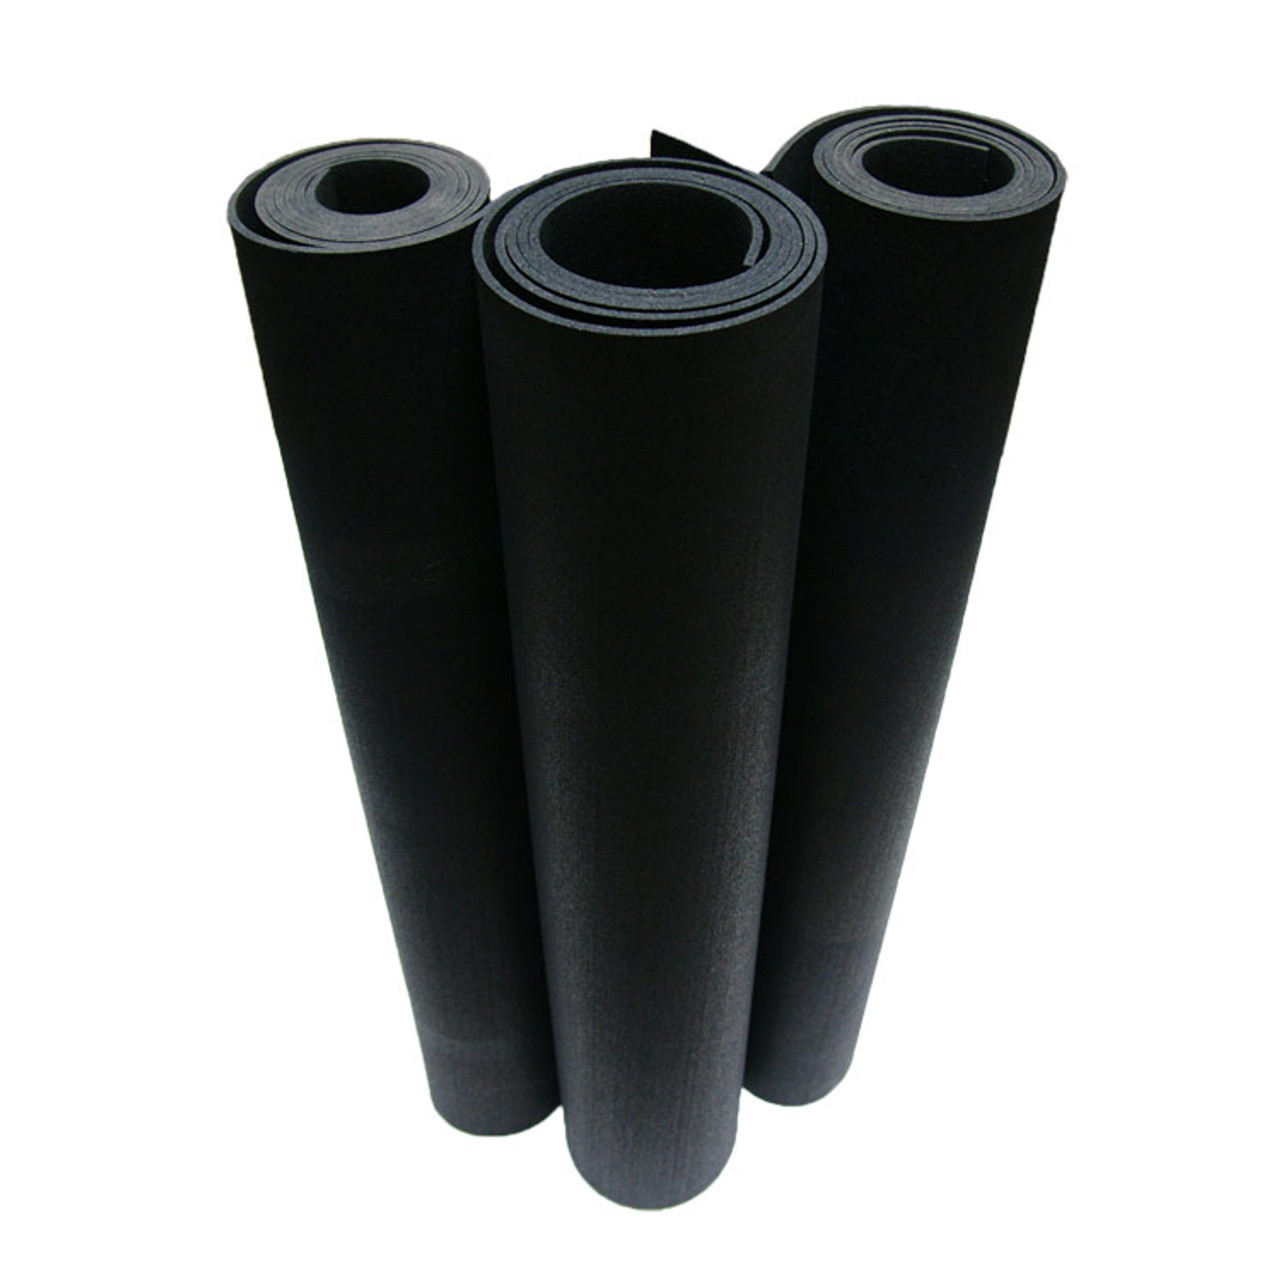 Rolled Rubber Flooring - Durable Rubber Flooring